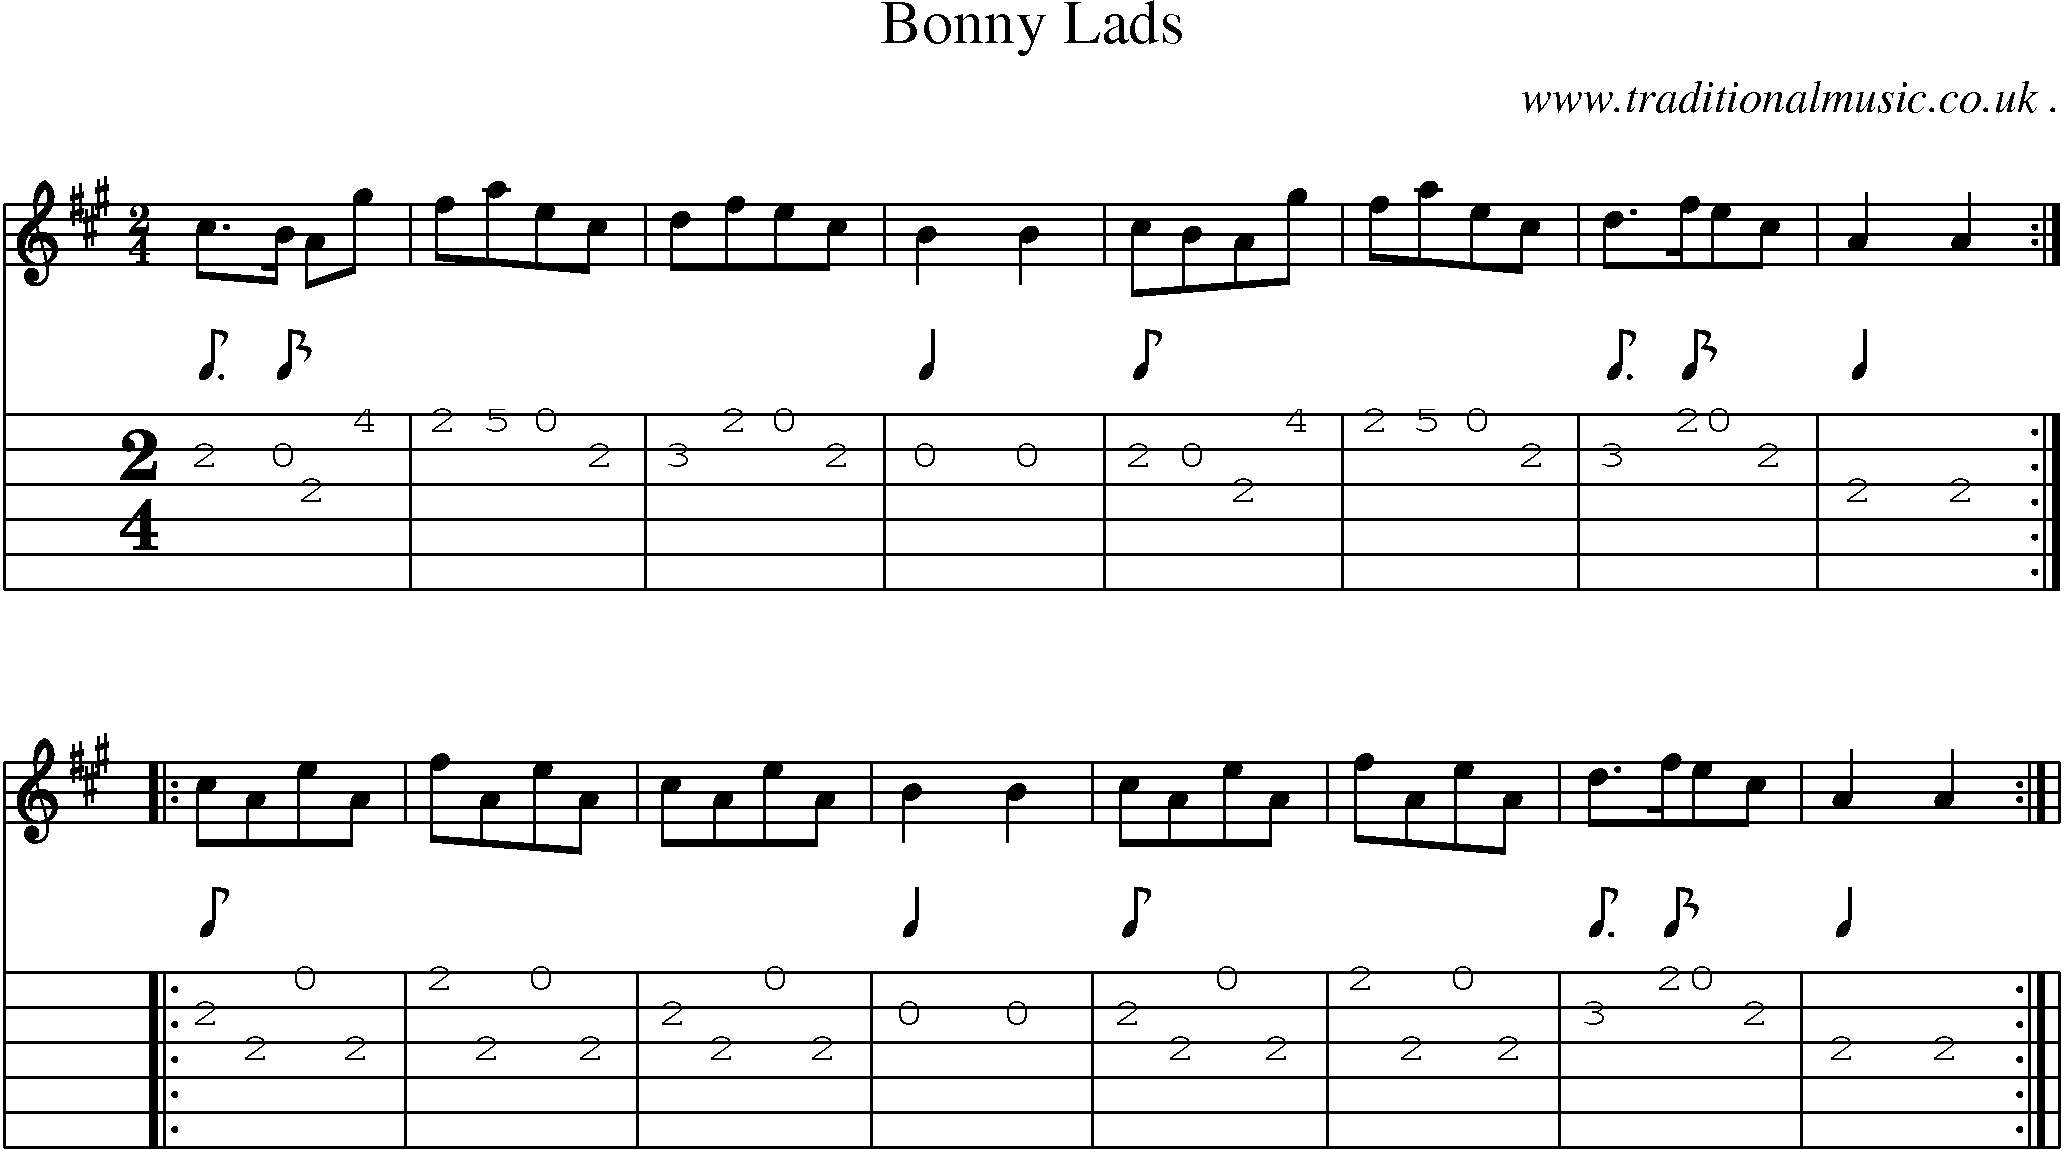 Sheet-Music and Guitar Tabs for Bonny Lads